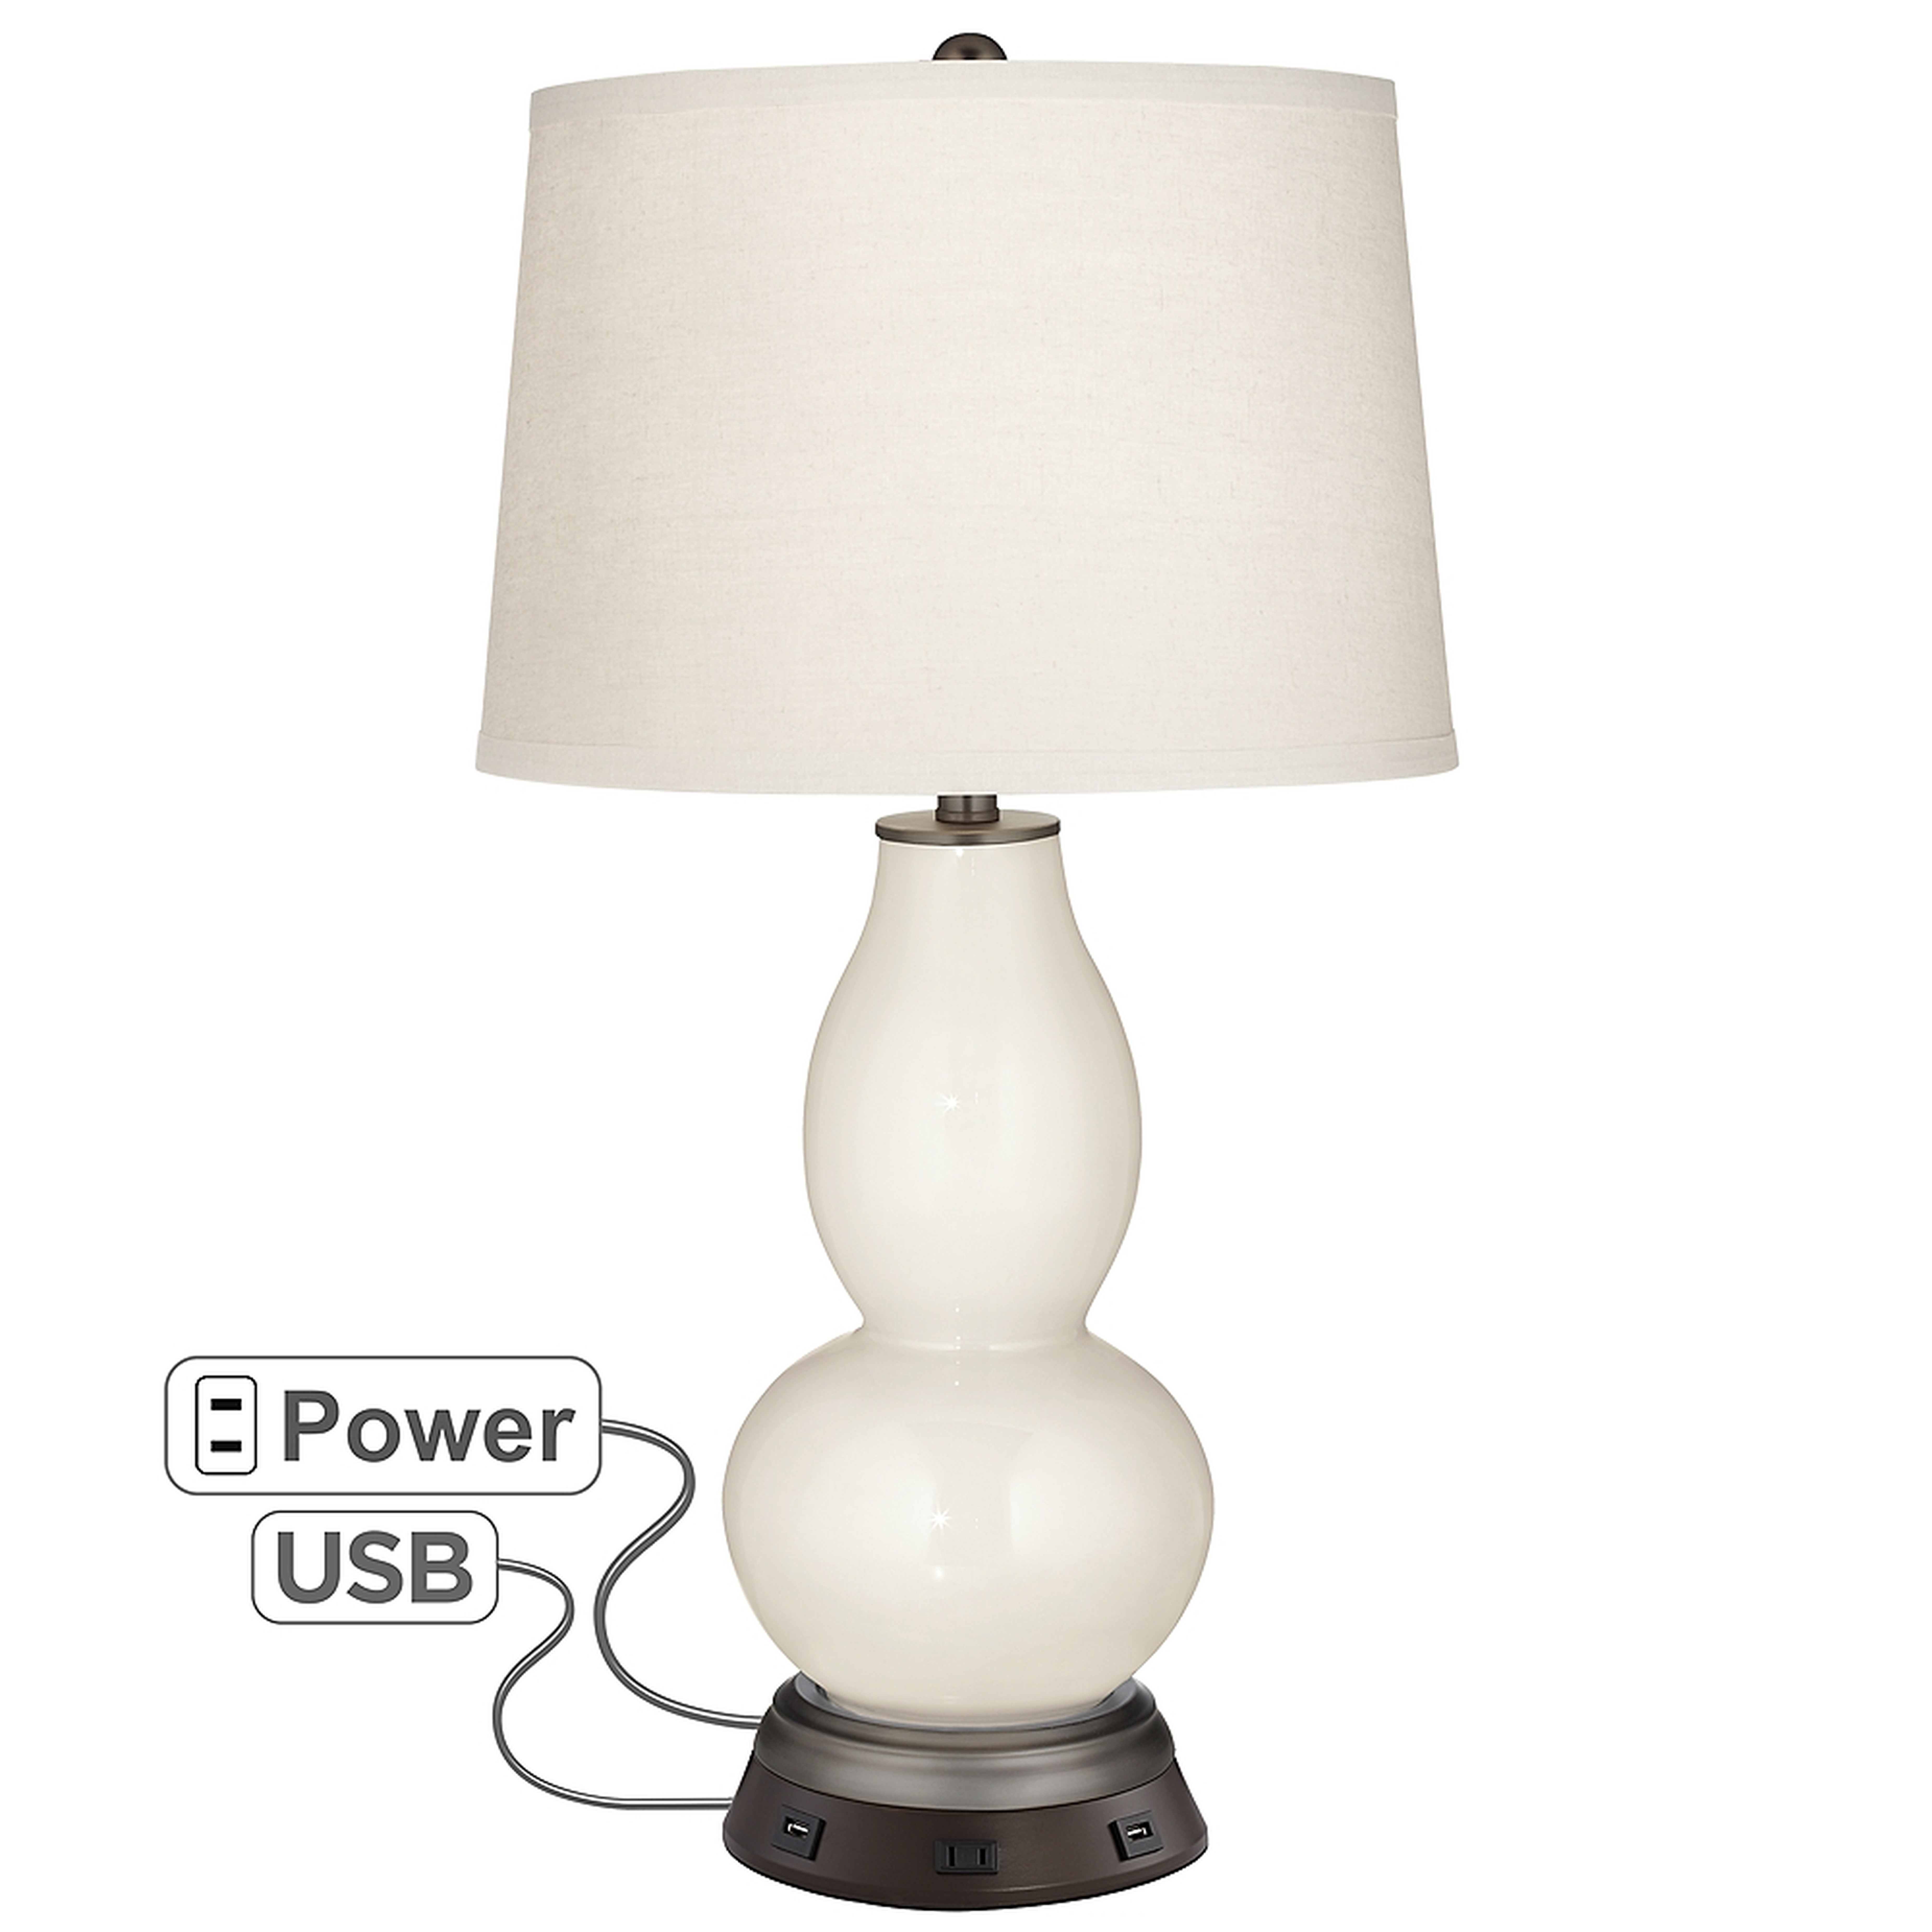 West Highland Double Gourd Table Lamp with USB Workstation Base - Style # 68W40 - Lamps Plus